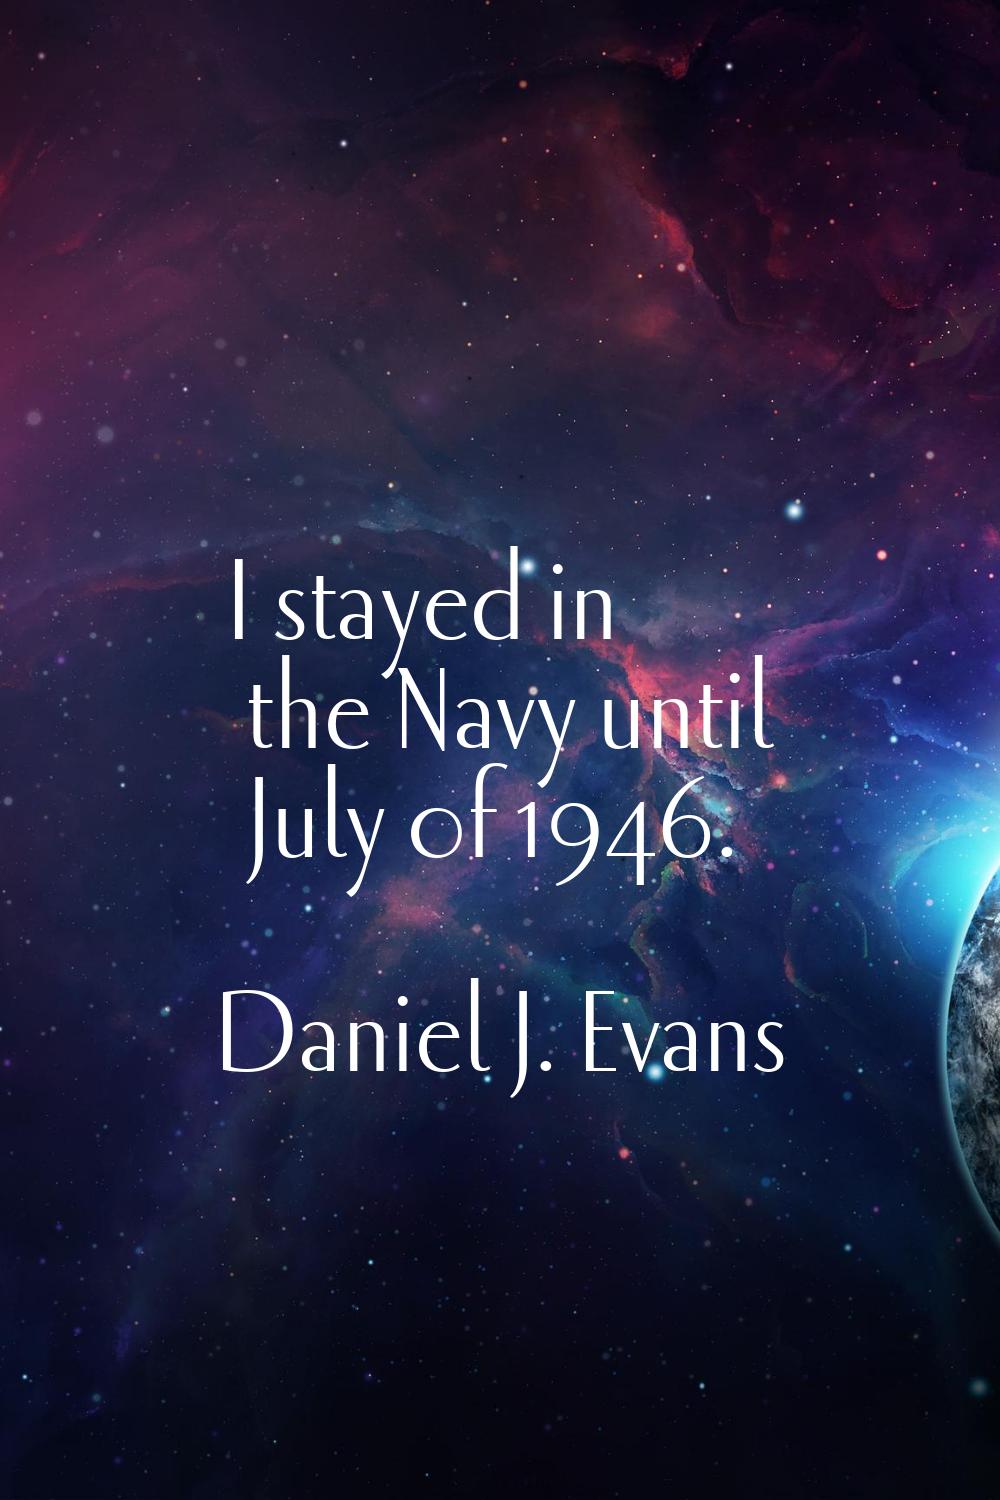 I stayed in the Navy until July of 1946.